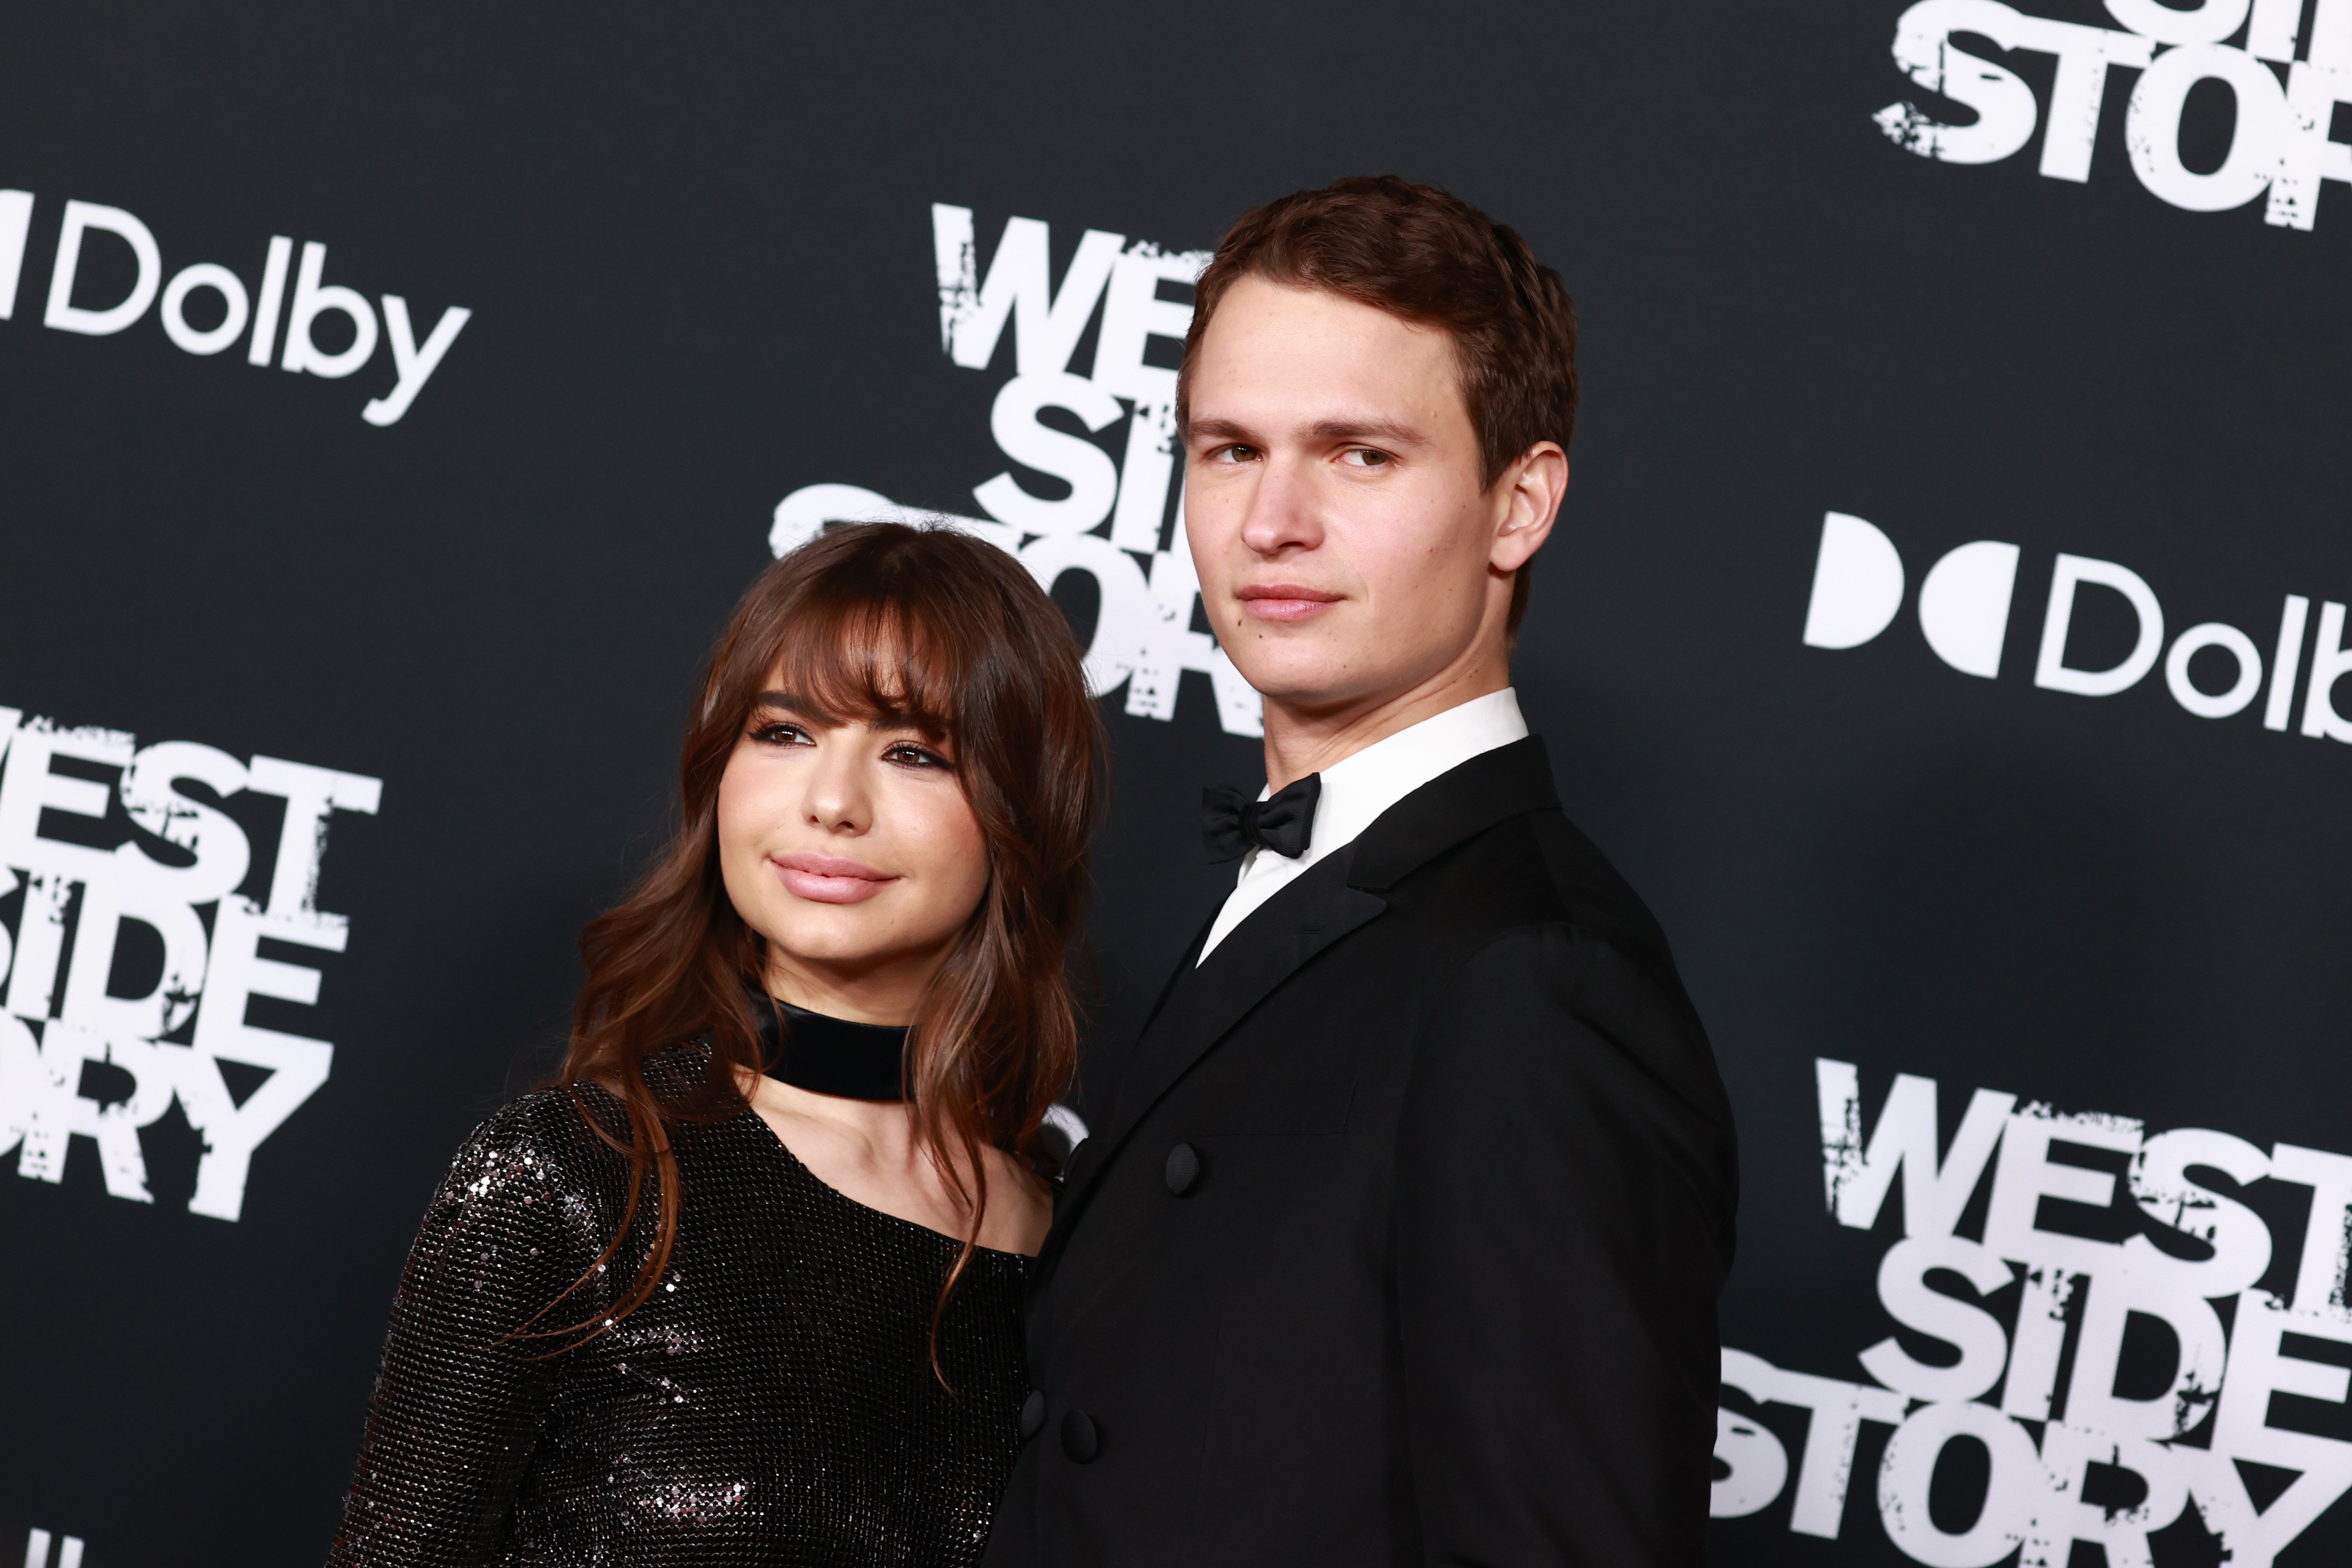 Violetta Komyshan and Ansel Elgort attend Disney Studios' premiere of "West Side Story" at El Capitan Theatre on December 07, 2021, in Los Angeles, California. | Source: Getty Images